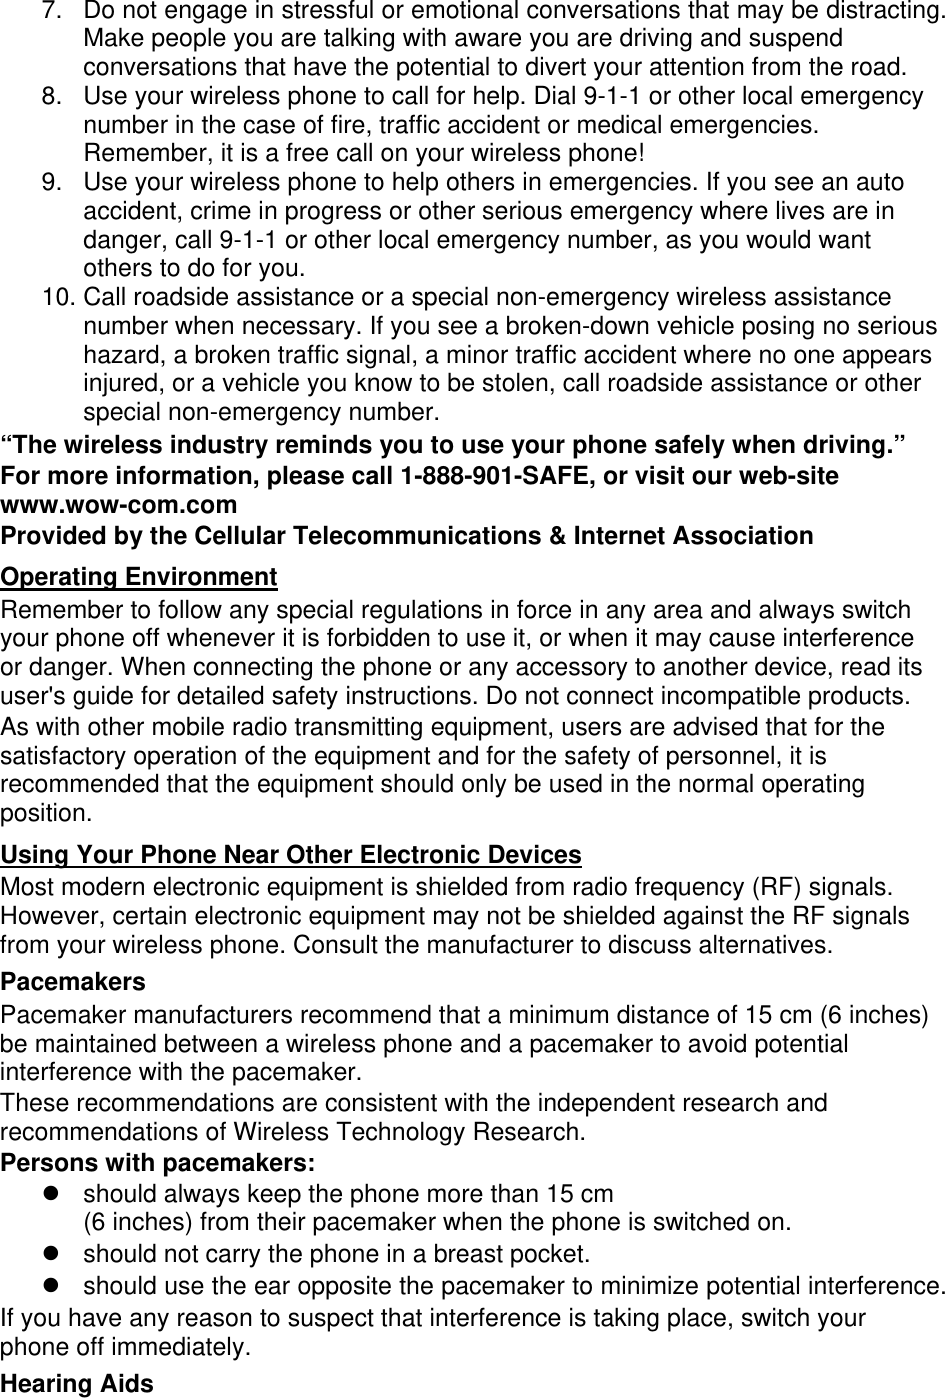 7. Do not engage in stressful or emotional conversations that may be distracting.Make people you are talking with aware you are driving and suspendconversations that have the potential to divert your attention from the road.8. Use your wireless phone to call for help. Dial 9-1-1 or other local emergencynumber in the case of fire, traffic accident or medical emergencies.Remember, it is a free call on your wireless phone!9. Use your wireless phone to help others in emergencies. If you see an autoaccident, crime in progress or other serious emergency where lives are indanger, call 9-1-1 or other local emergency number, as you would wantothers to do for you.10. Call roadside assistance or a special non-emergency wireless assistancenumber when necessary. If you see a broken-down vehicle posing no serioushazard, a broken traffic signal, a minor traffic accident where no one appearsinjured, or a vehicle you know to be stolen, call roadside assistance or otherspecial non-emergency number.“The wireless industry reminds you to use your phone safely when driving.” For more information, please call 1-888-901-SAFE, or visit our web-site www.wow-com.com Provided by the Cellular Telecommunications &amp; Internet Association Operating Environment Remember to follow any special regulations in force in any area and always switch your phone off whenever it is forbidden to use it, or when it may cause interference or danger. When connecting the phone or any accessory to another device, read its user&apos;s guide for detailed safety instructions. Do not connect incompatible products. As with other mobile radio transmitting equipment, users are advised that for the satisfactory operation of the equipment and for the safety of personnel, it is recommended that the equipment should only be used in the normal operating position. Using Your Phone Near Other Electronic Devices Most modern electronic equipment is shielded from radio frequency (RF) signals. However, certain electronic equipment may not be shielded against the RF signals from your wireless phone. Consult the manufacturer to discuss alternatives. Pacemakers Pacemaker manufacturers recommend that a minimum distance of 15 cm (6 inches) be maintained between a wireless phone and a pacemaker to avoid potential interference with the pacemaker. These recommendations are consistent with the independent research and recommendations of Wireless Technology Research. Persons with pacemakers: should always keep the phone more than 15 cm(6 inches) from their pacemaker when the phone is switched on.should not carry the phone in a breast pocket.should use the ear opposite the pacemaker to minimize potential interference.If you have any reason to suspect that interference is taking place, switch your phone off immediately. Hearing Aids 